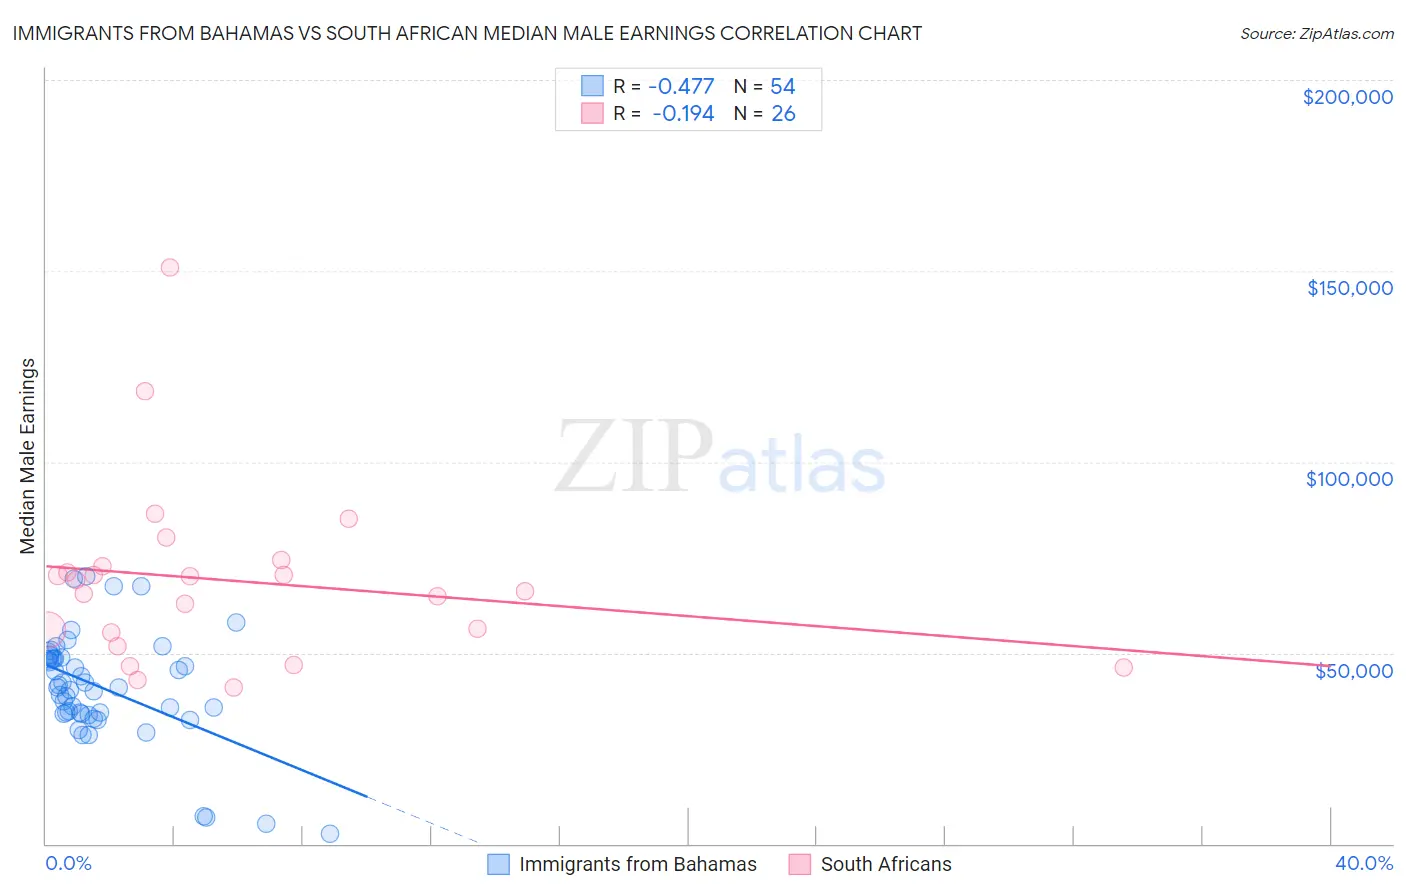 Immigrants from Bahamas vs South African Median Male Earnings